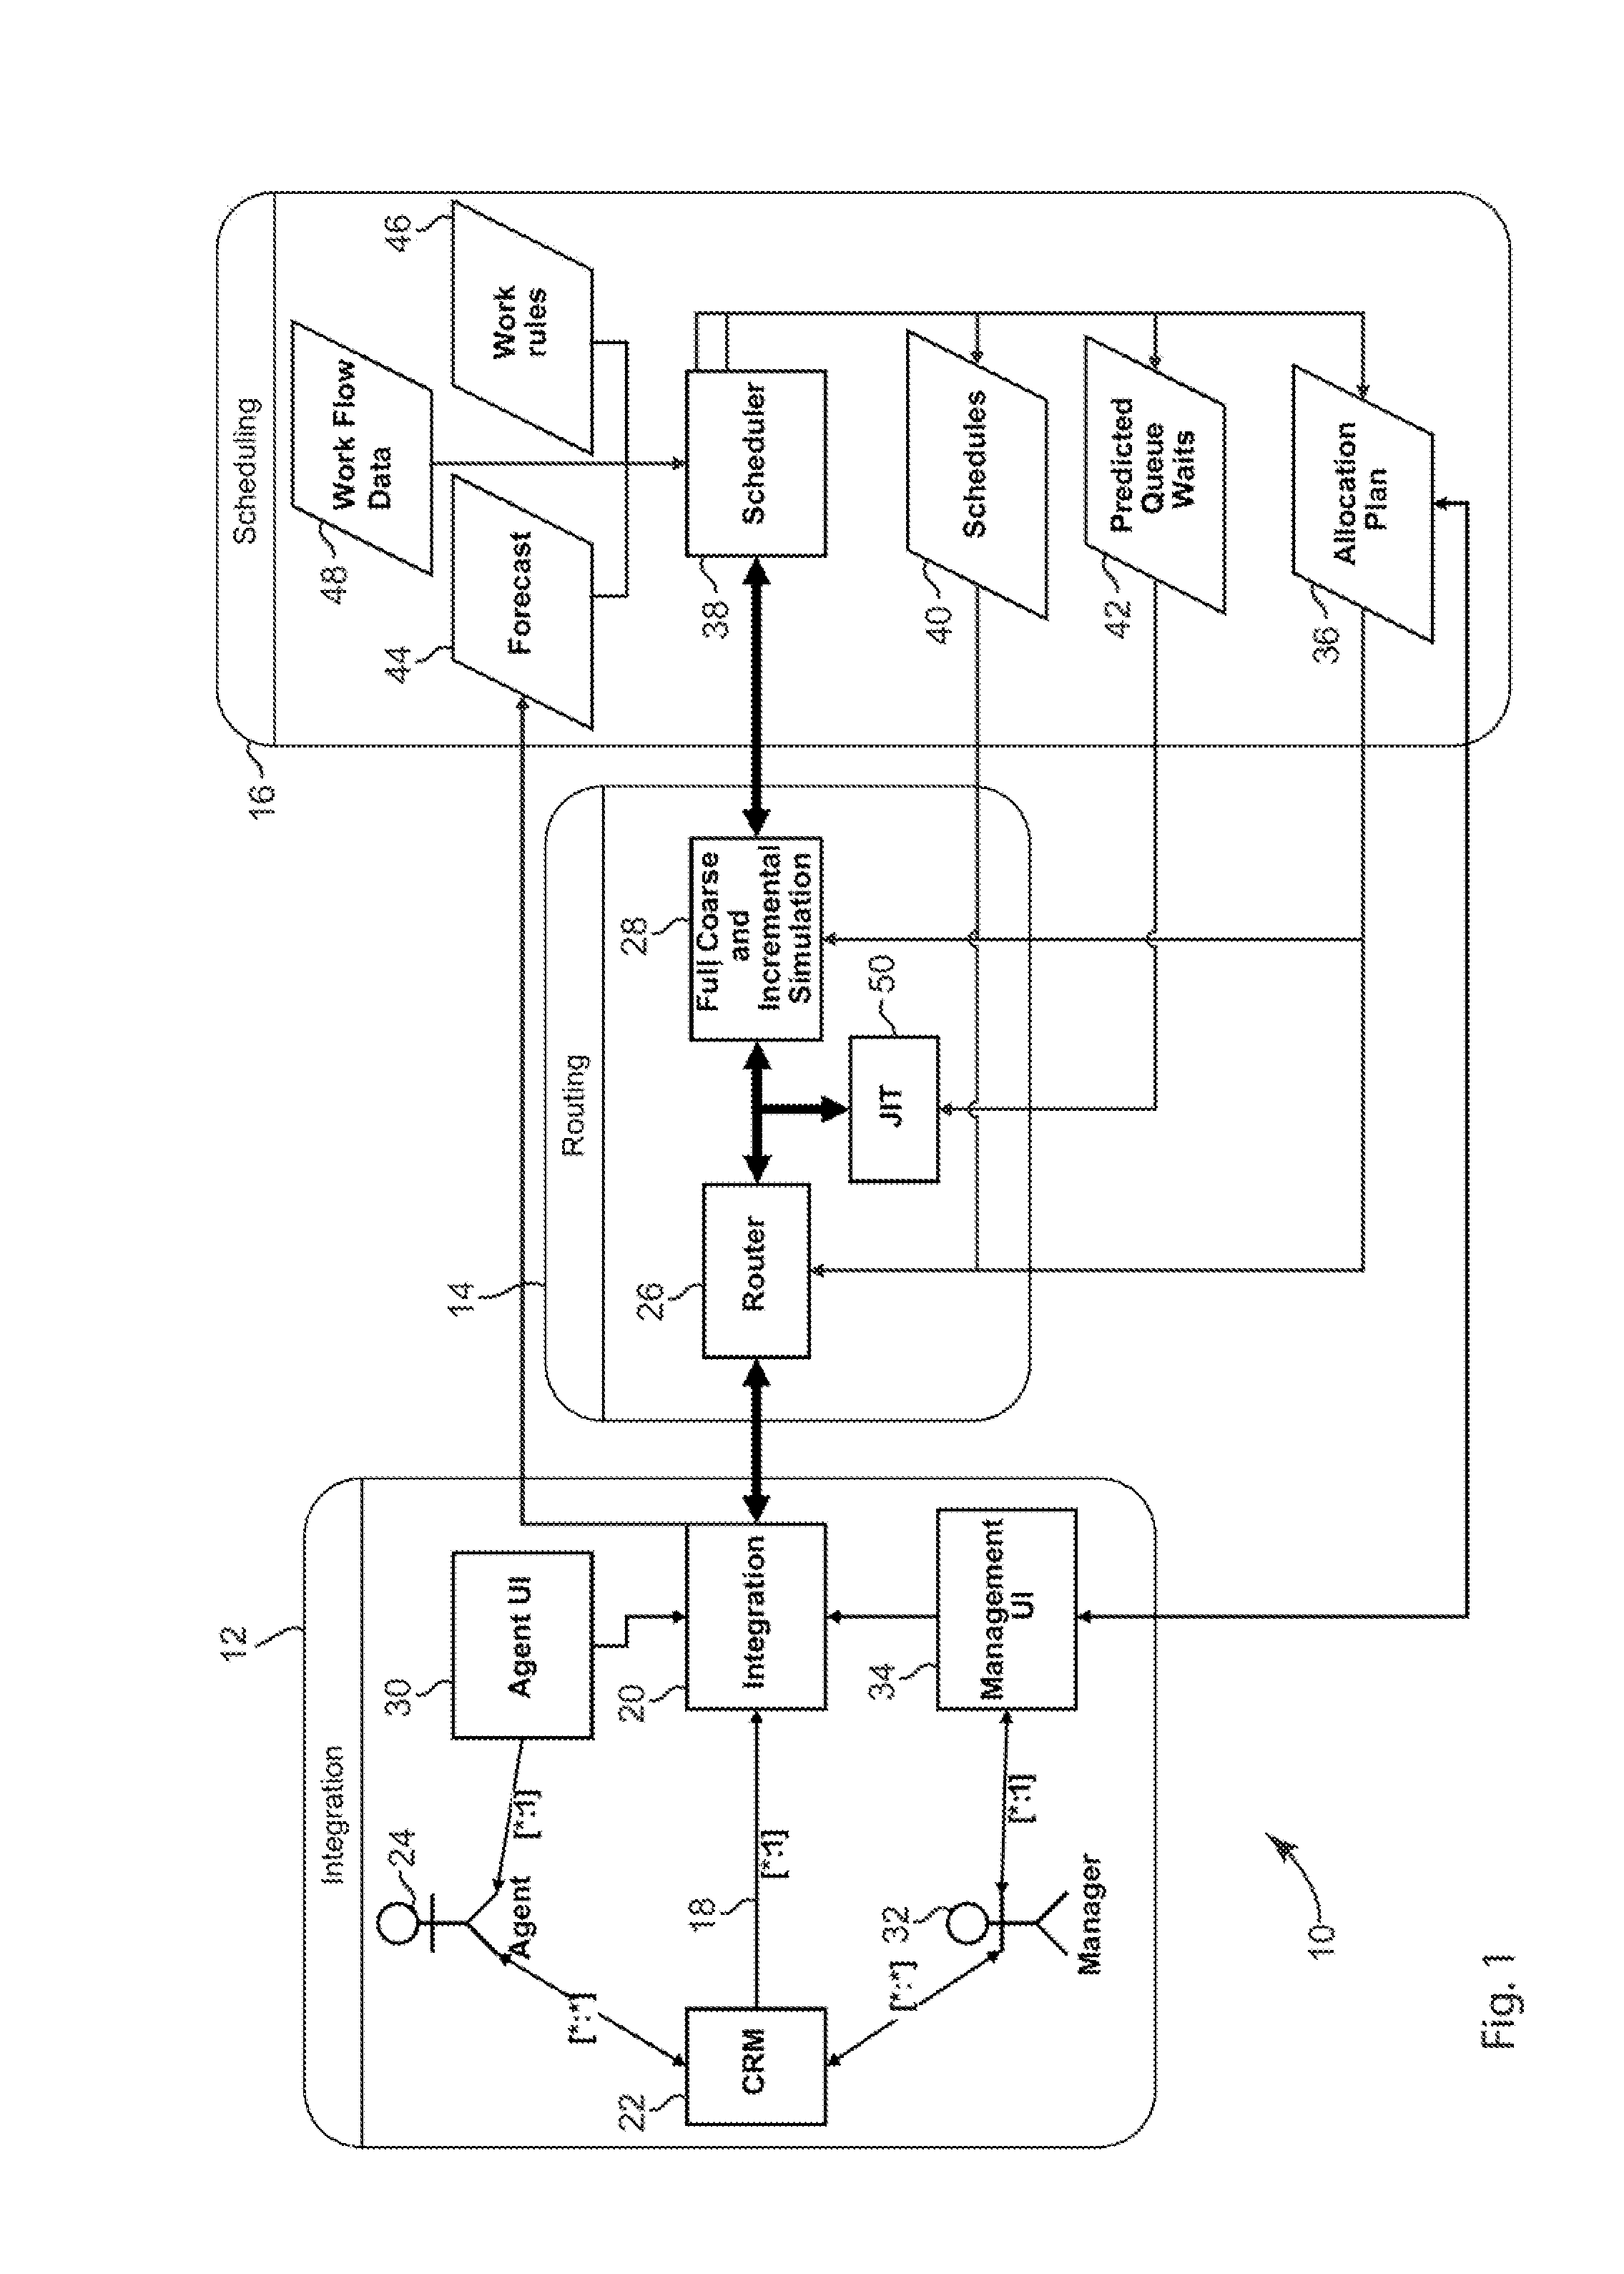 System and Method of Work Assignment Management